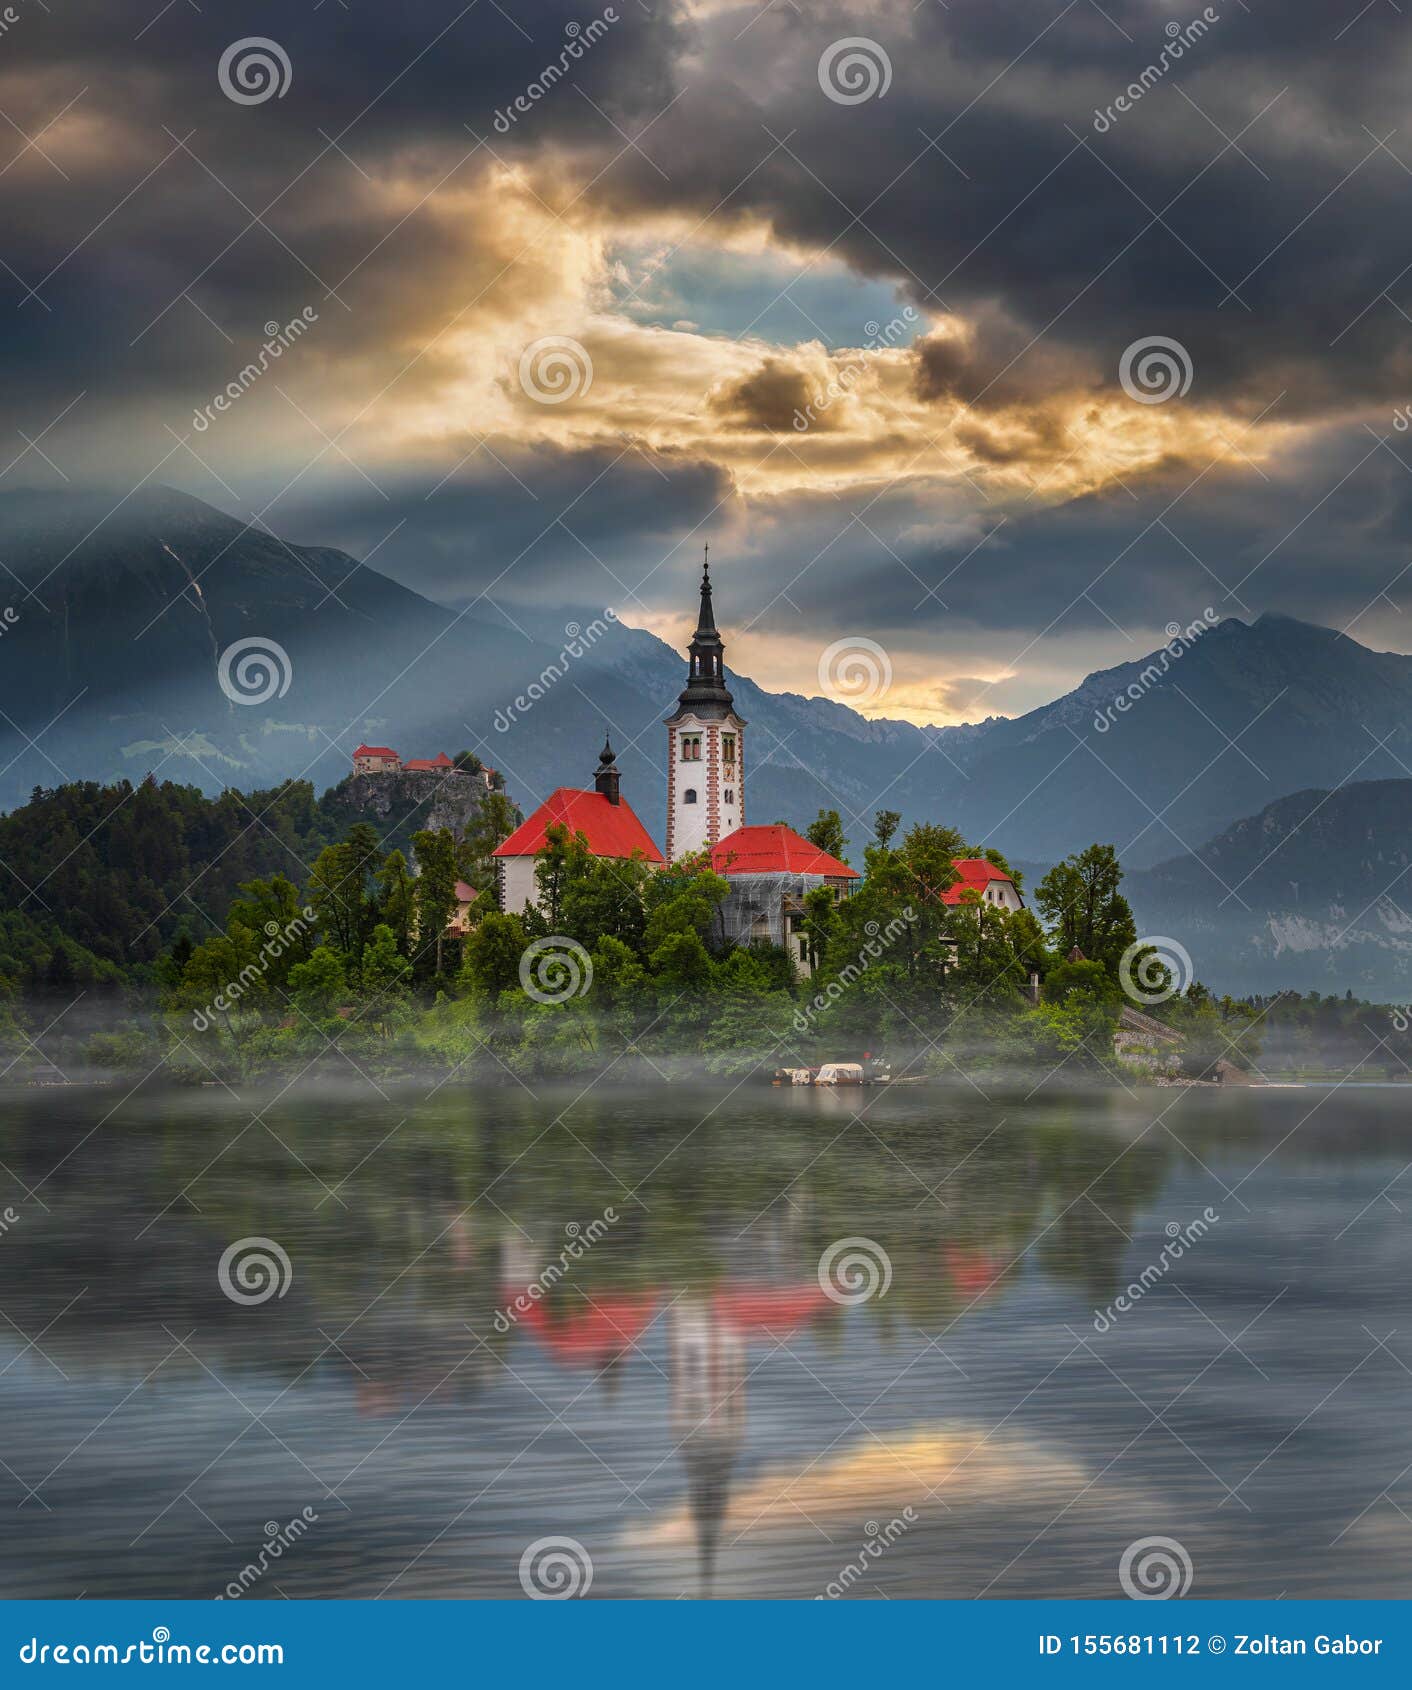 bled, slovenia - misty sunrise at lake bled blejsko jezero with the pilgrimage church of the assumption of maria on an island